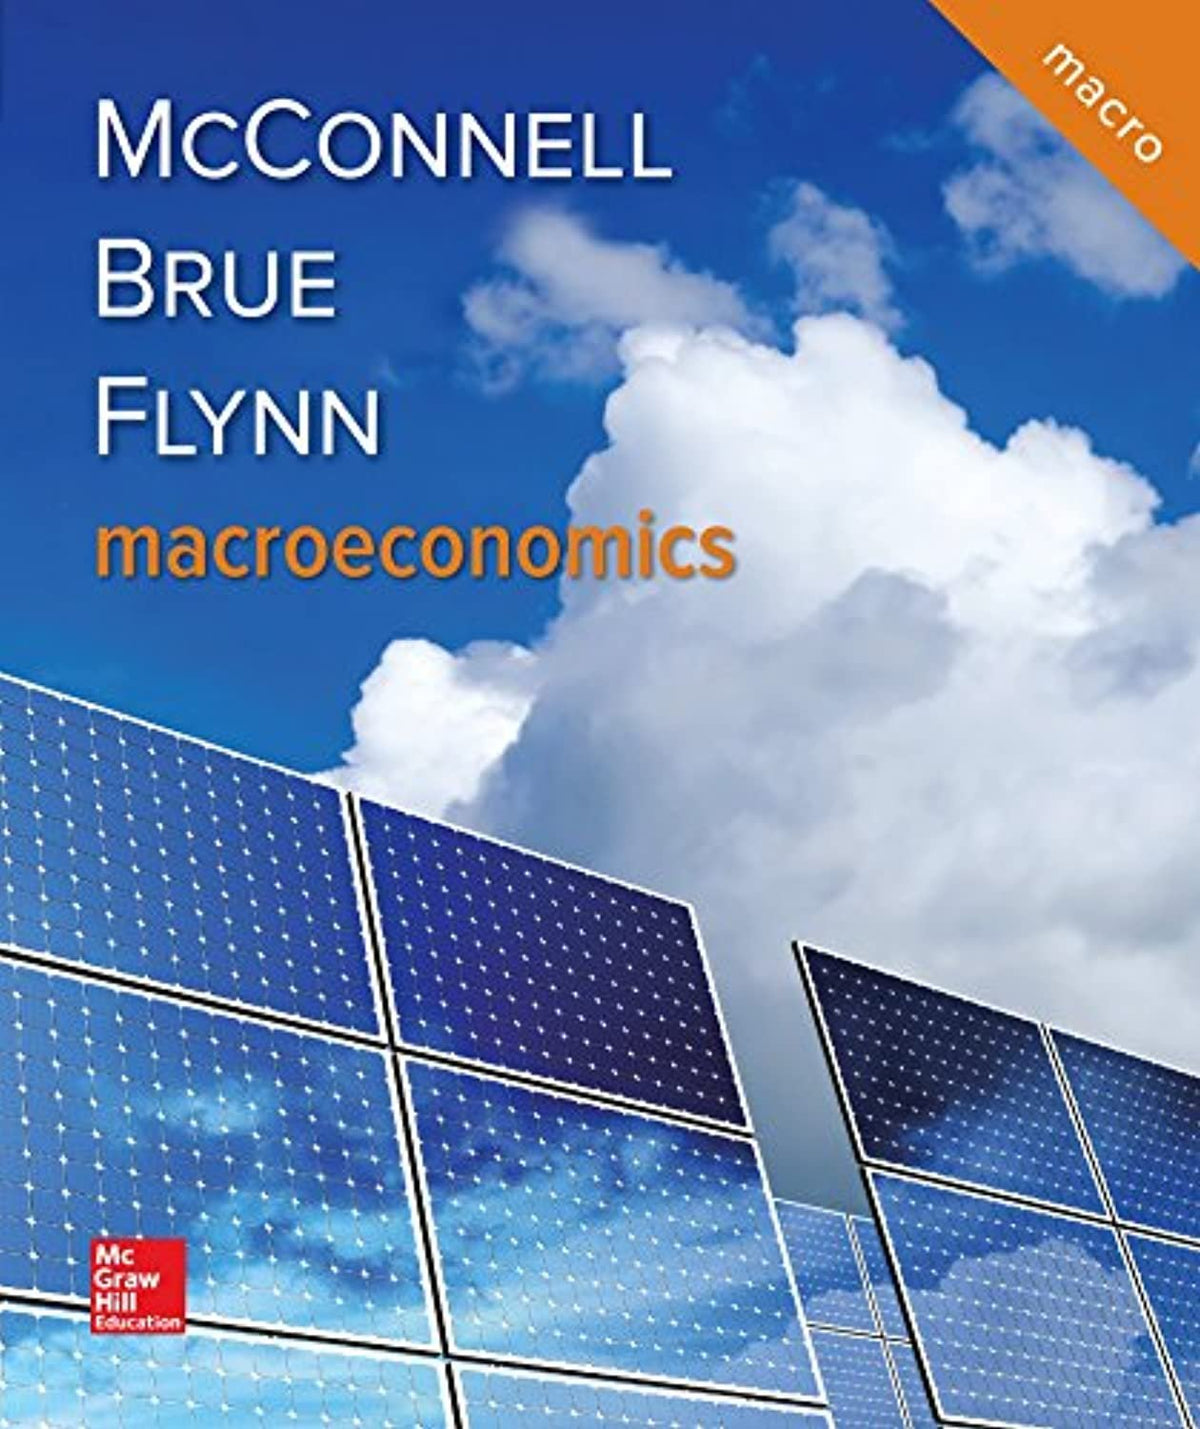 21　McConnell,　Campbell　Books　Macroeconomics,　—　Express　by　Edition　Paperback,　(Used)